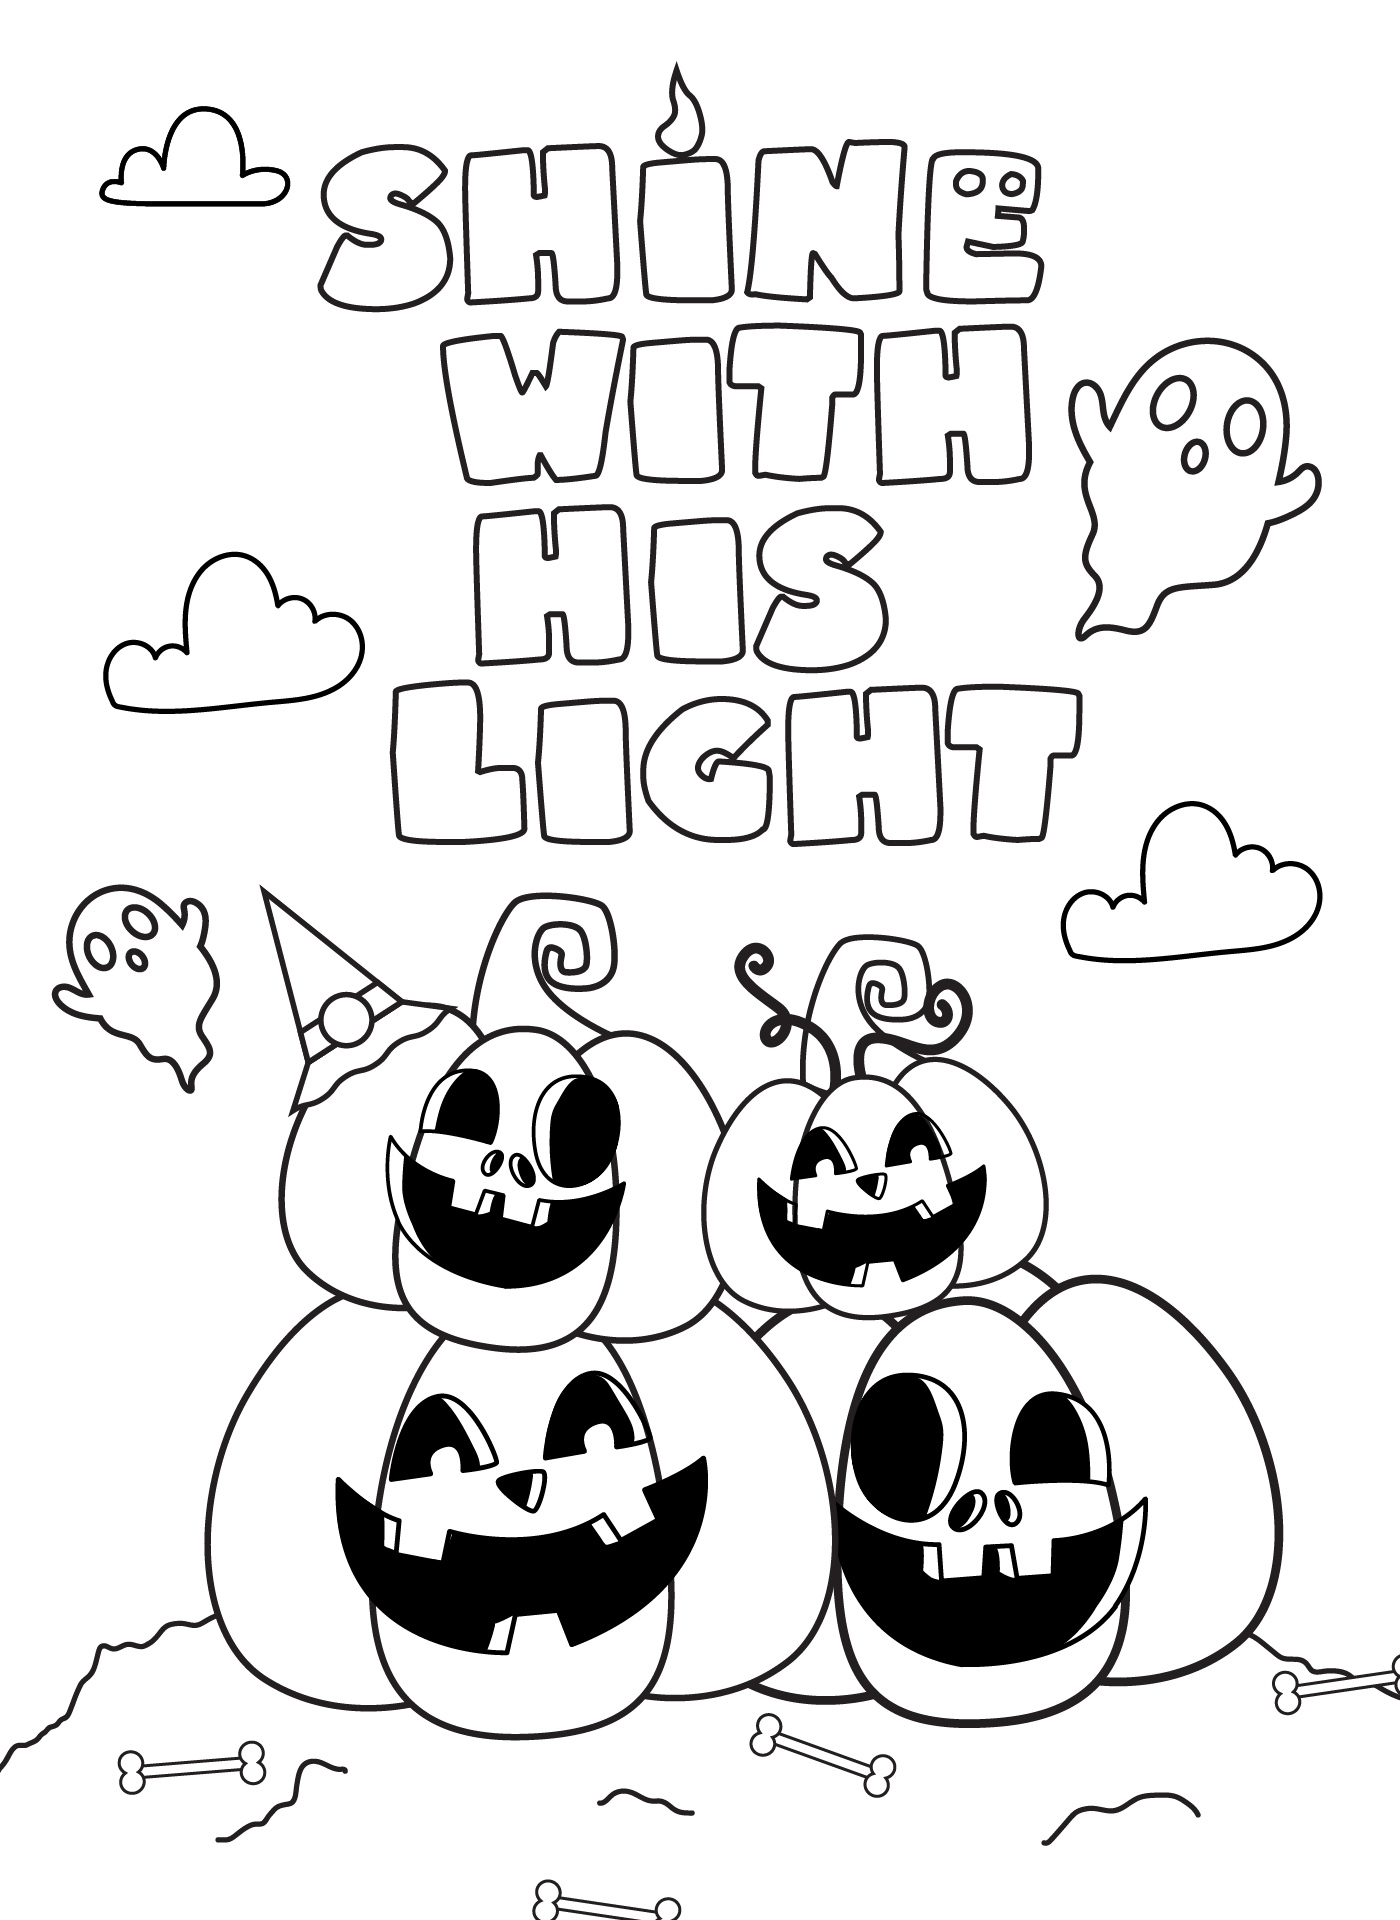 Printable Coloring Pages With Bible Verses For Halloween